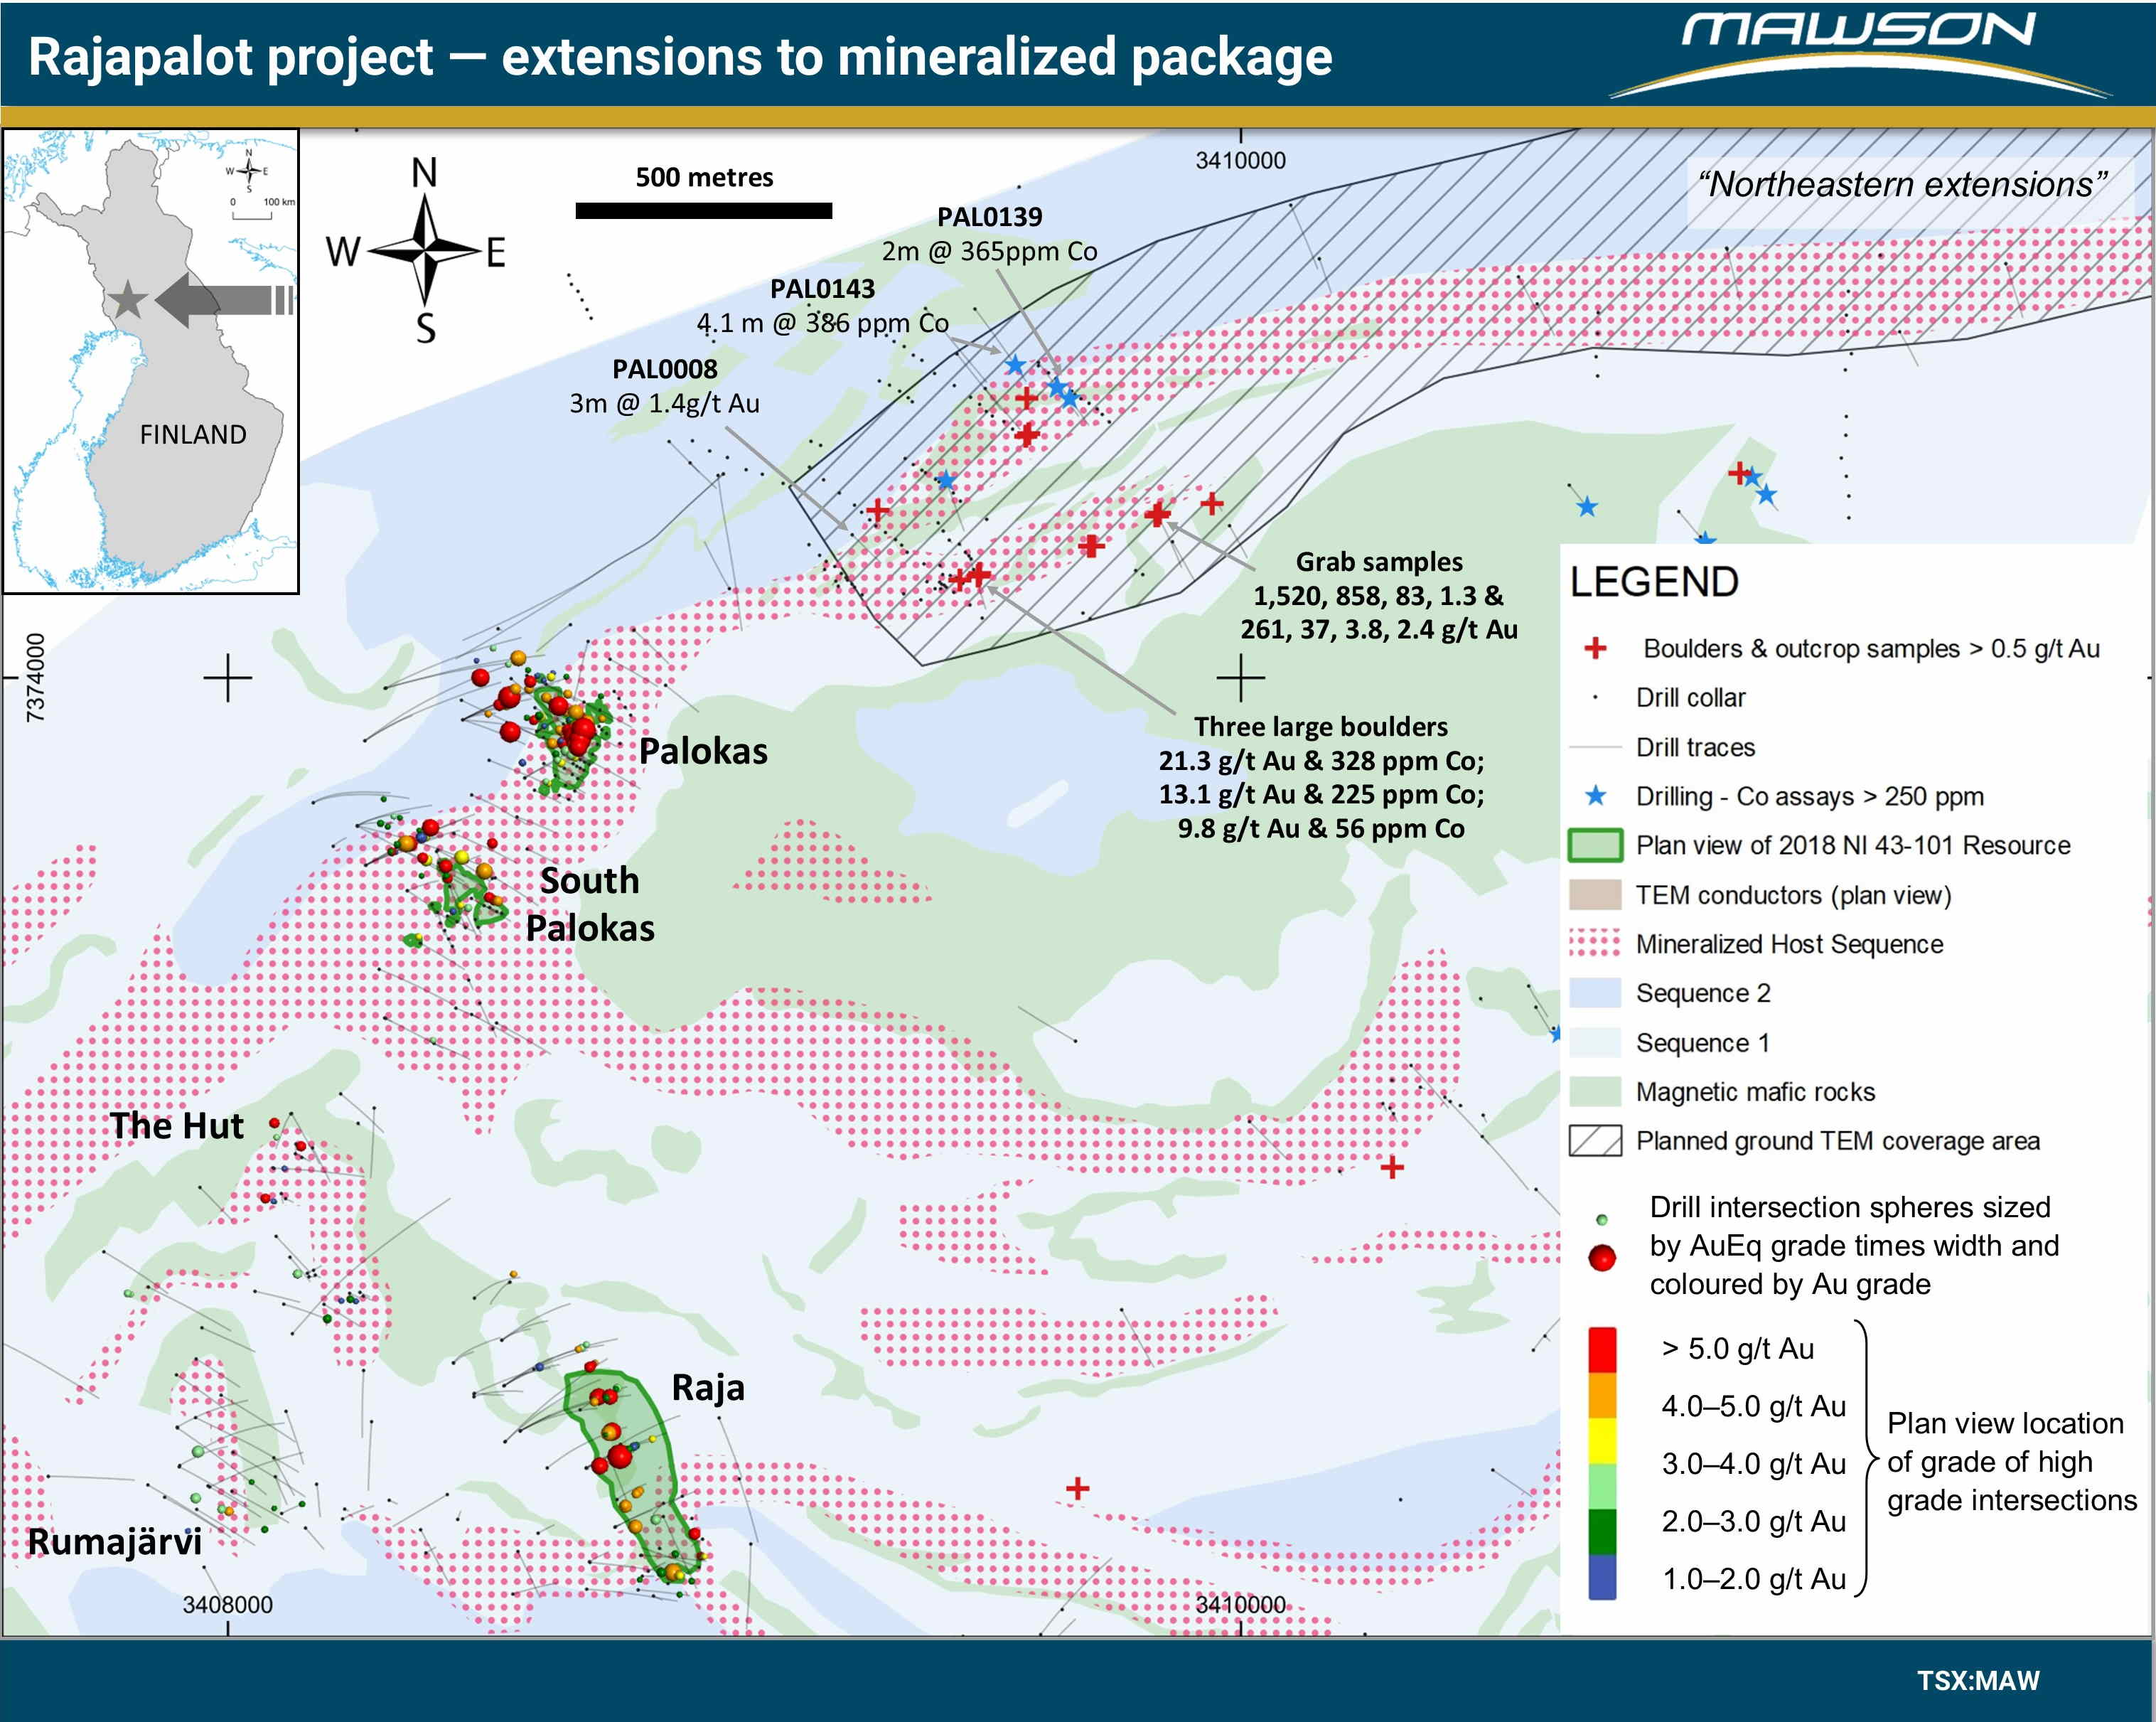 Mawson Resources Limited, Wednesday, June 24, 2020, Press release picture